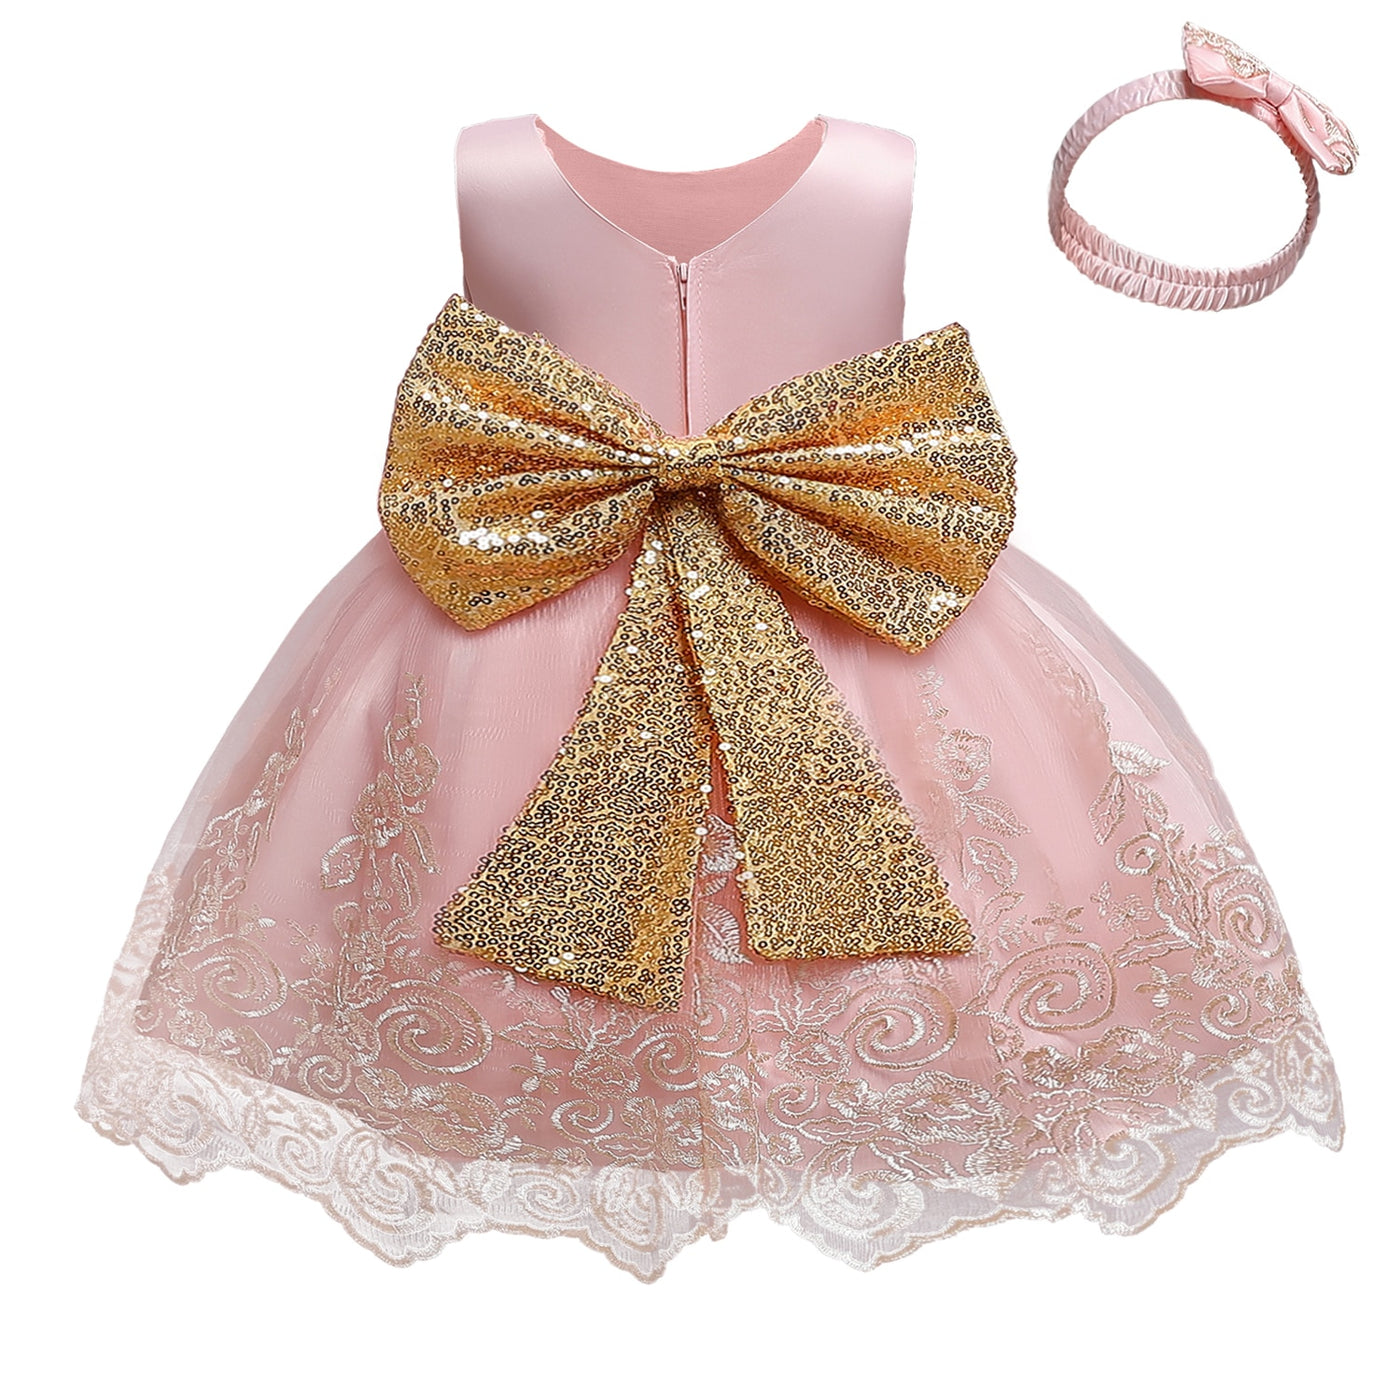 Gold Bow Tutu Elegant Gown 12M-5yrs Baby Toddler Girl Dress - Coco Potato - dresses and partywear for little girls